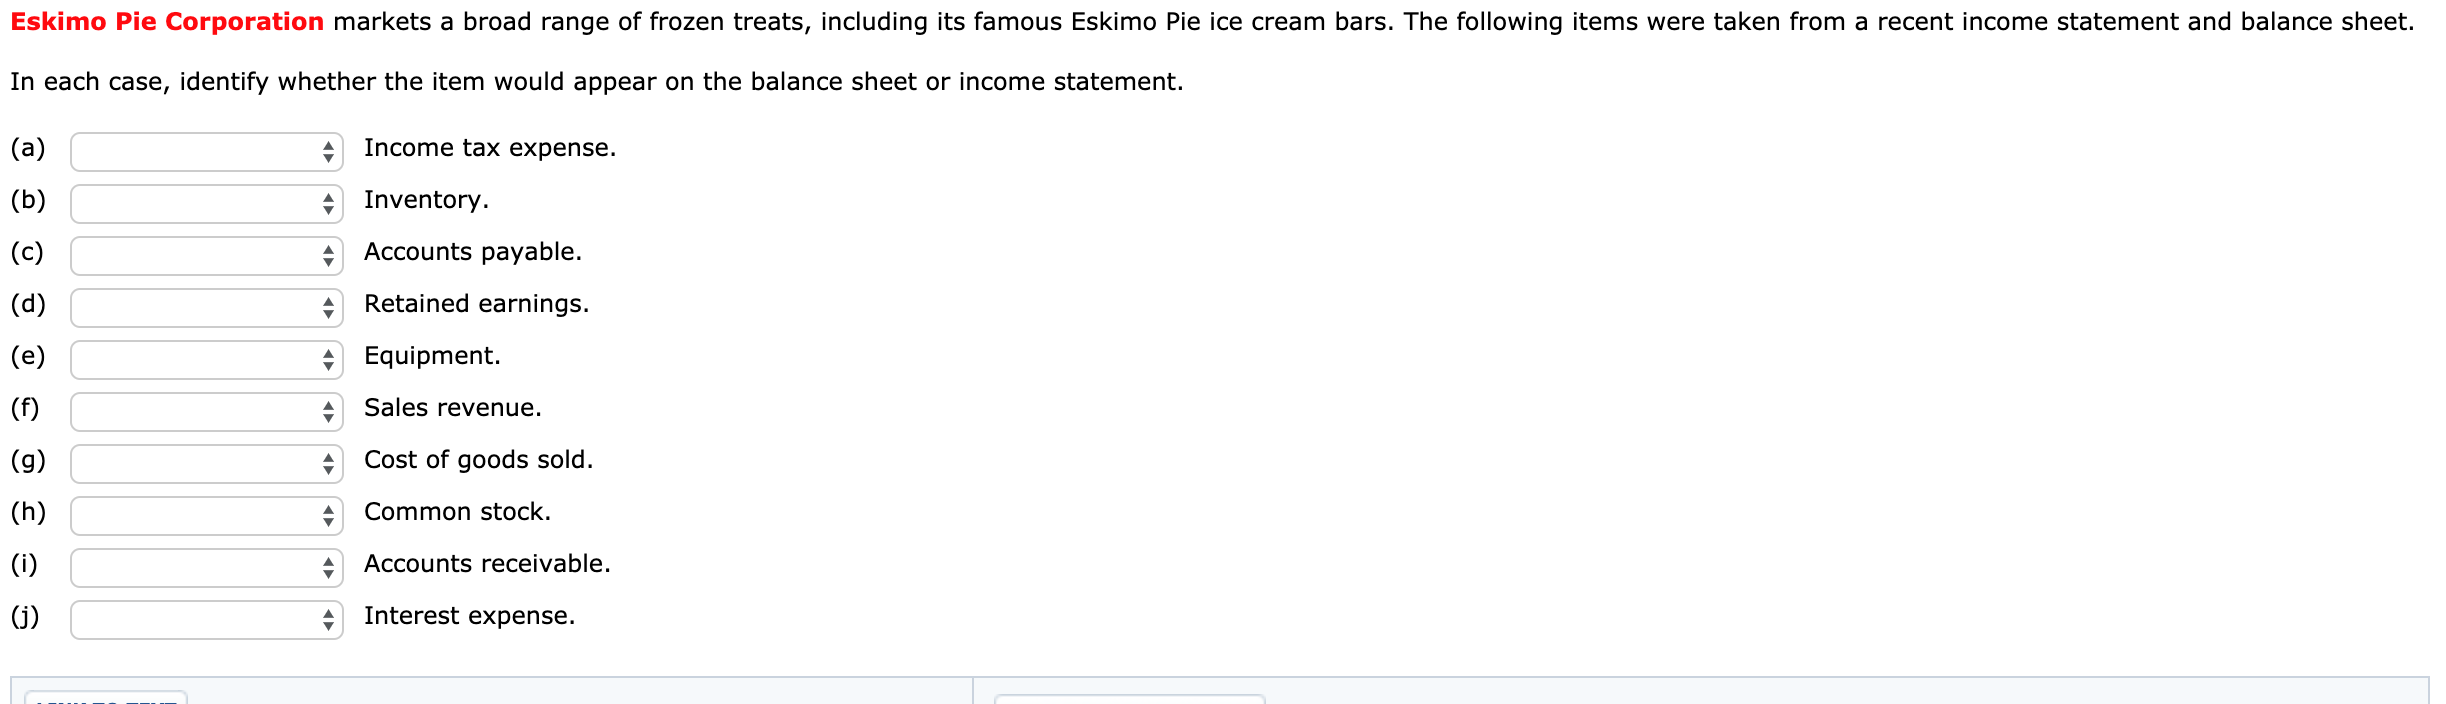 Eskimo Pie Corporation markets a broad range of frozen treats, including its famous Eskimo Pie ice cream bars. The following items were taken from a recent income statement and balance sheet.
In each case, identify whether the item would appear on the balance sheet or income statement.
Income tax expense.
(a)
Inventory.
(b)
Accounts payable.
(c)
Retained earnings.
(d)
* Equipment.
(e)
Sales revenue.
(f)
Cost of goods sold.
(g)
Common stock.
(h)
Accounts receivable.
(i)
Interest expense.
(j)
